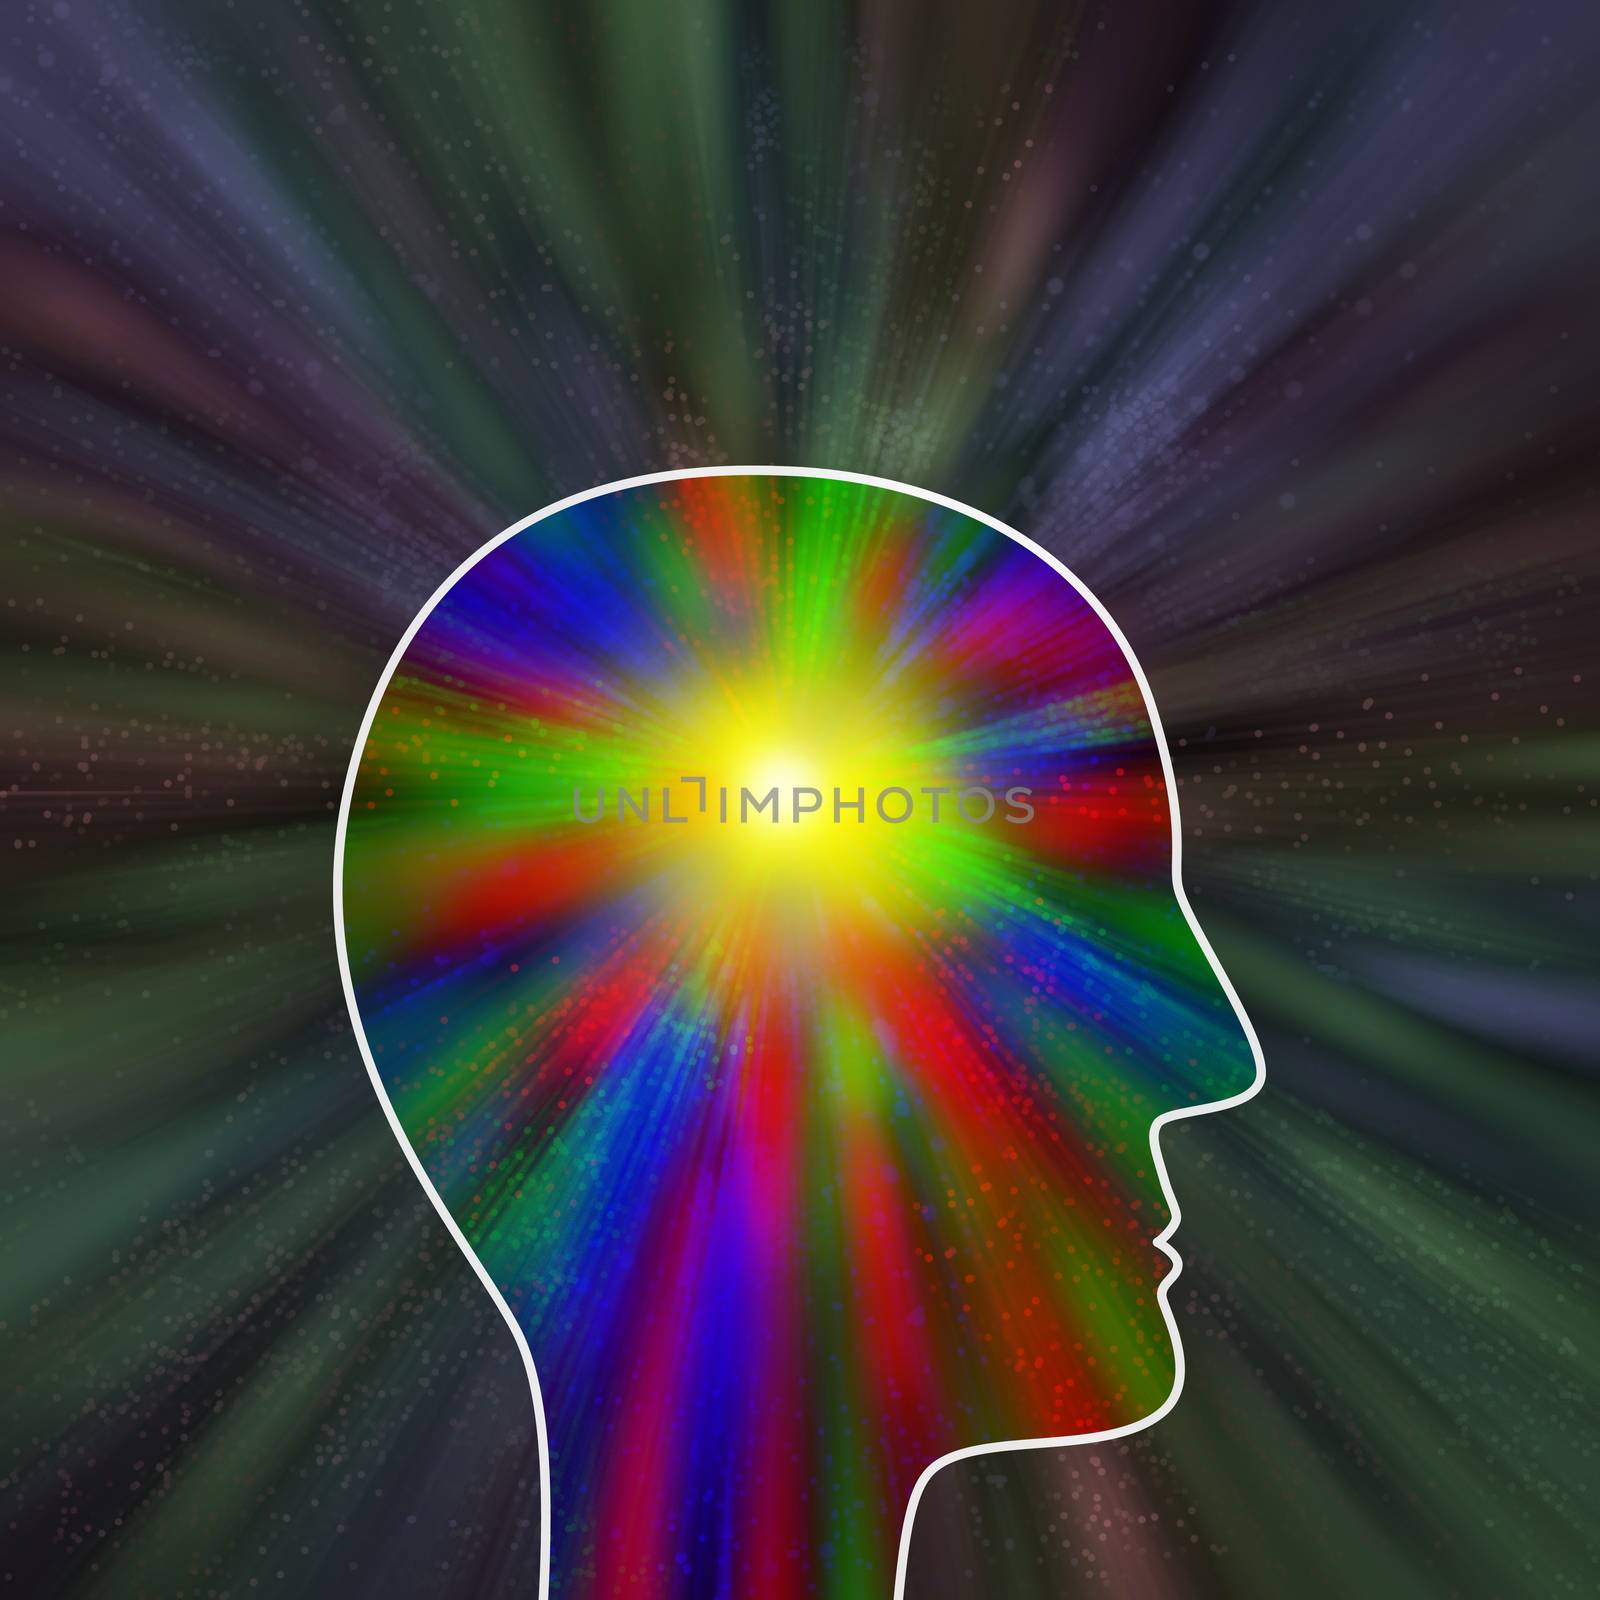 Colorful explosion of thought or pain as suggested by the head profile